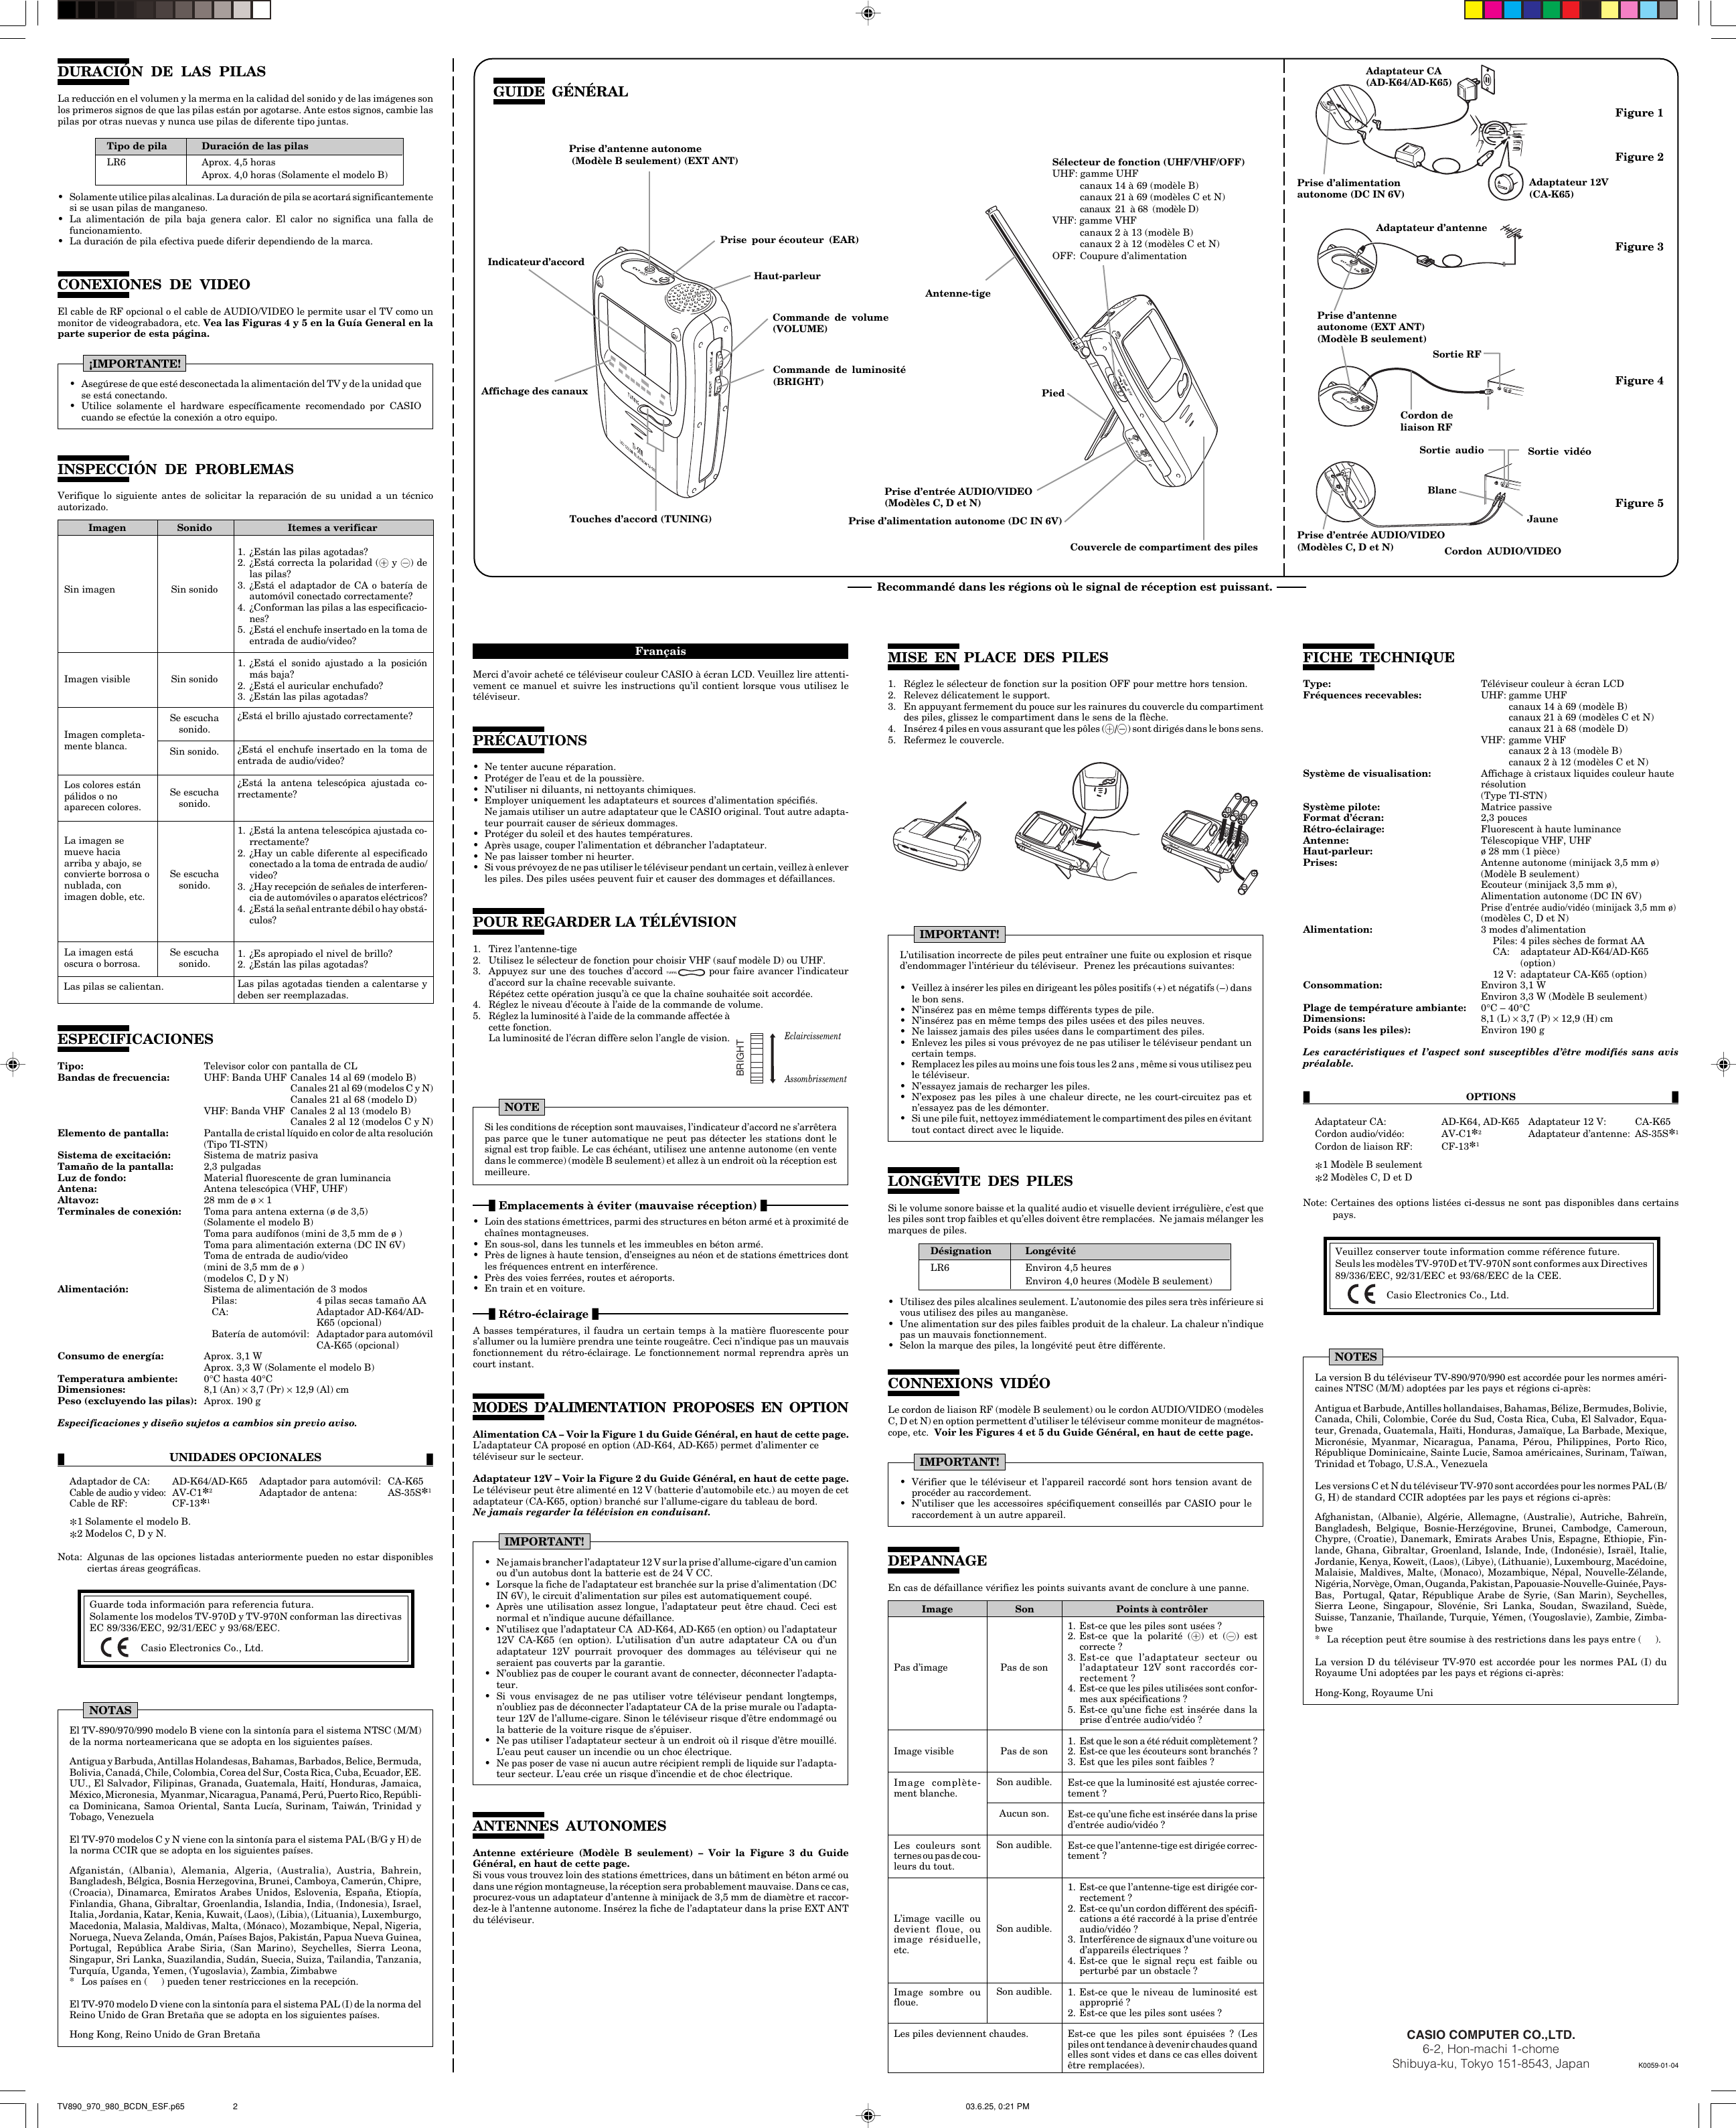 Page 2 of 2 - Casio Casio-Lcd-Color-Television-Tv-890-990-Users-Manual-  Casio-lcd-color-television-tv-890-990-users-manual